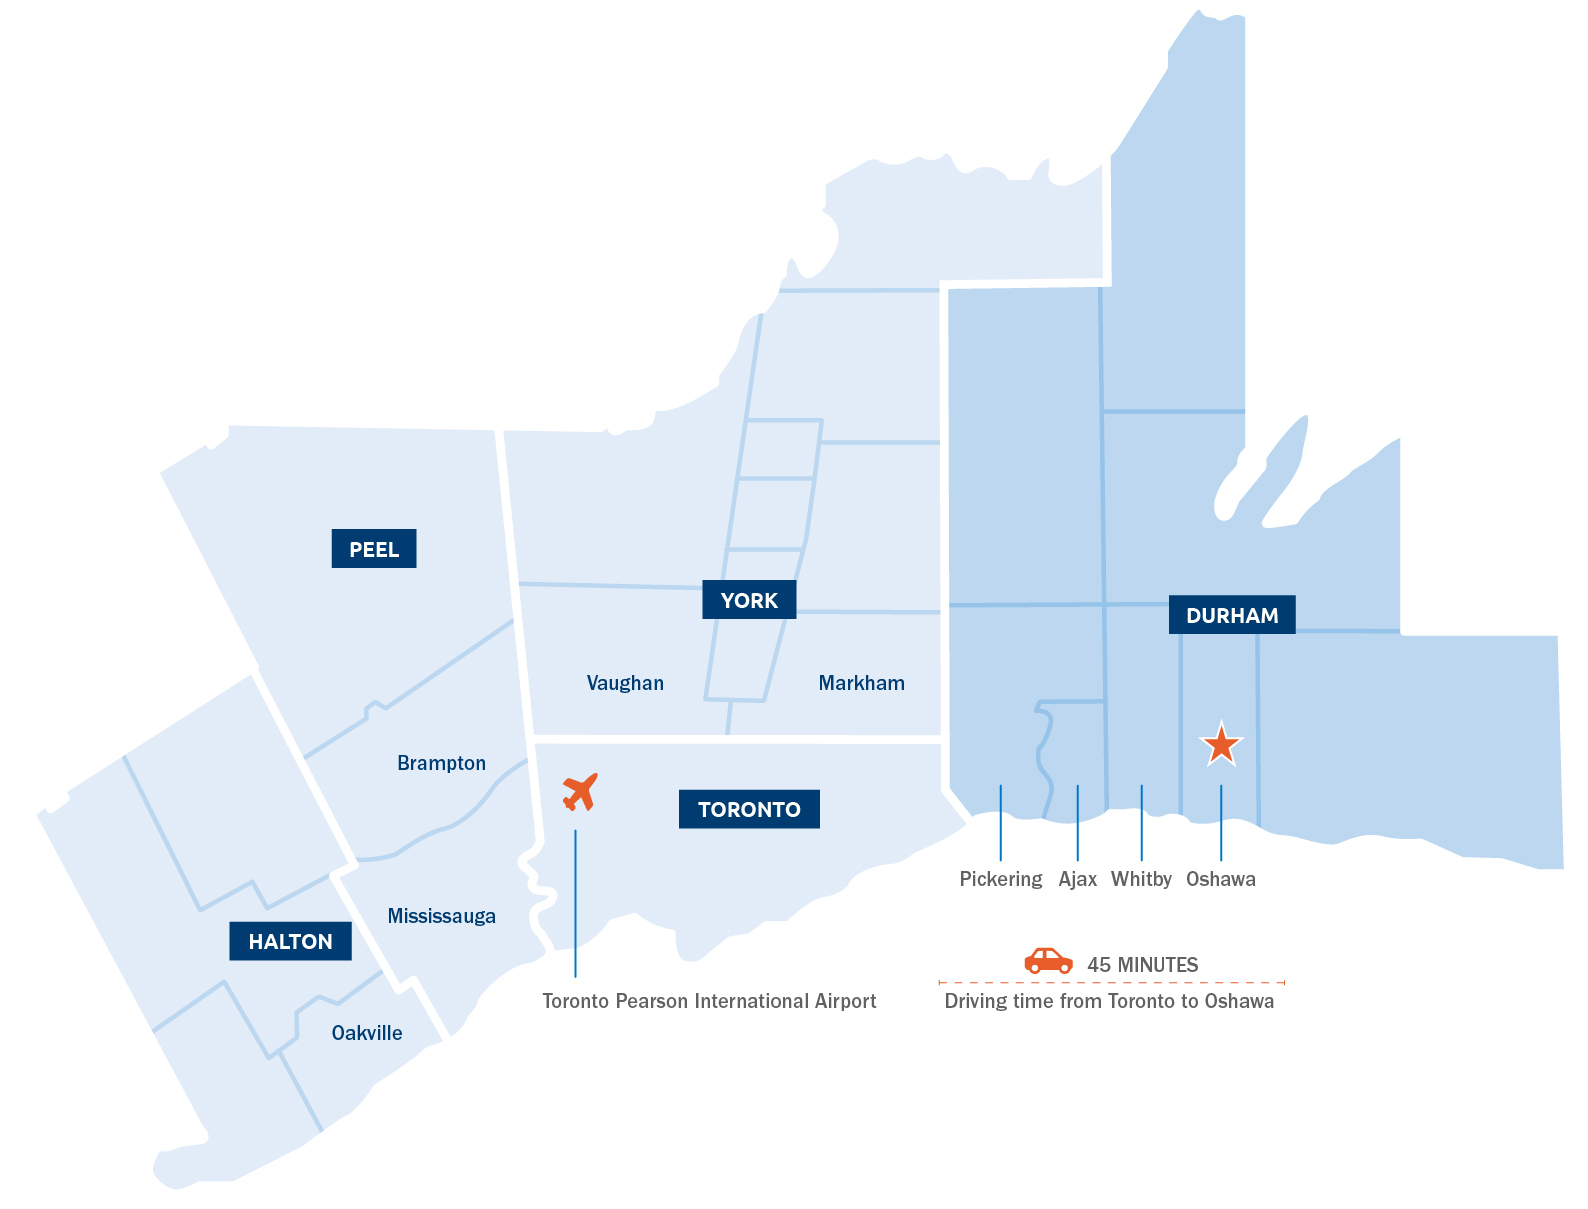 Map of Oshawa in the Greater Toronto Area